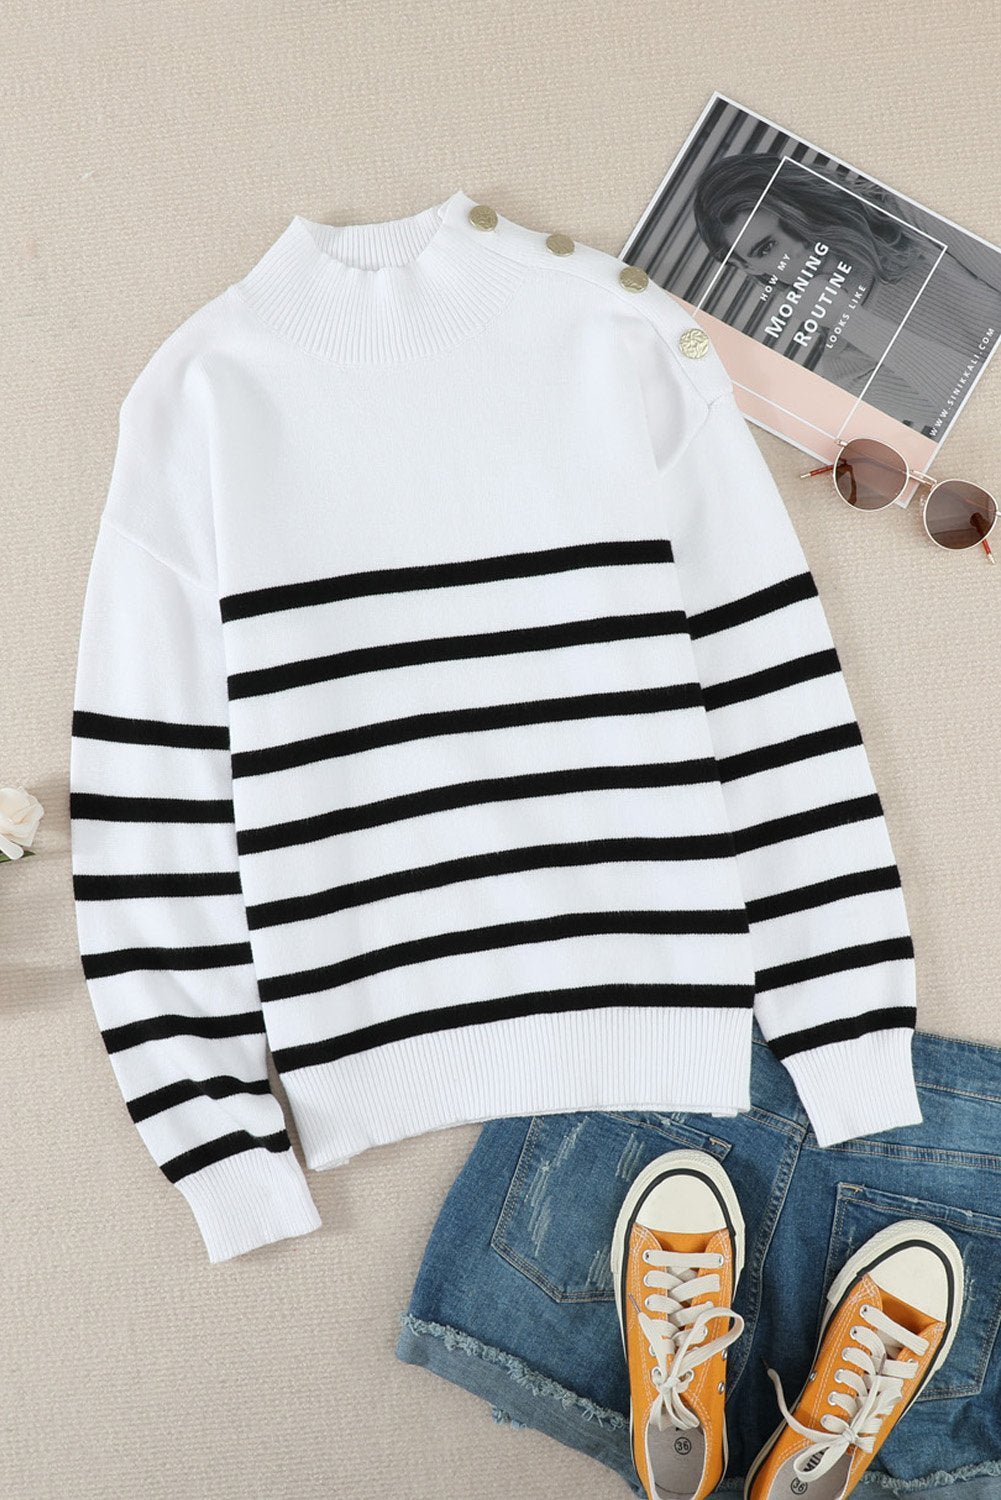 Winter White Striped Turtleneck Long Sleeve Sweater with Buttons